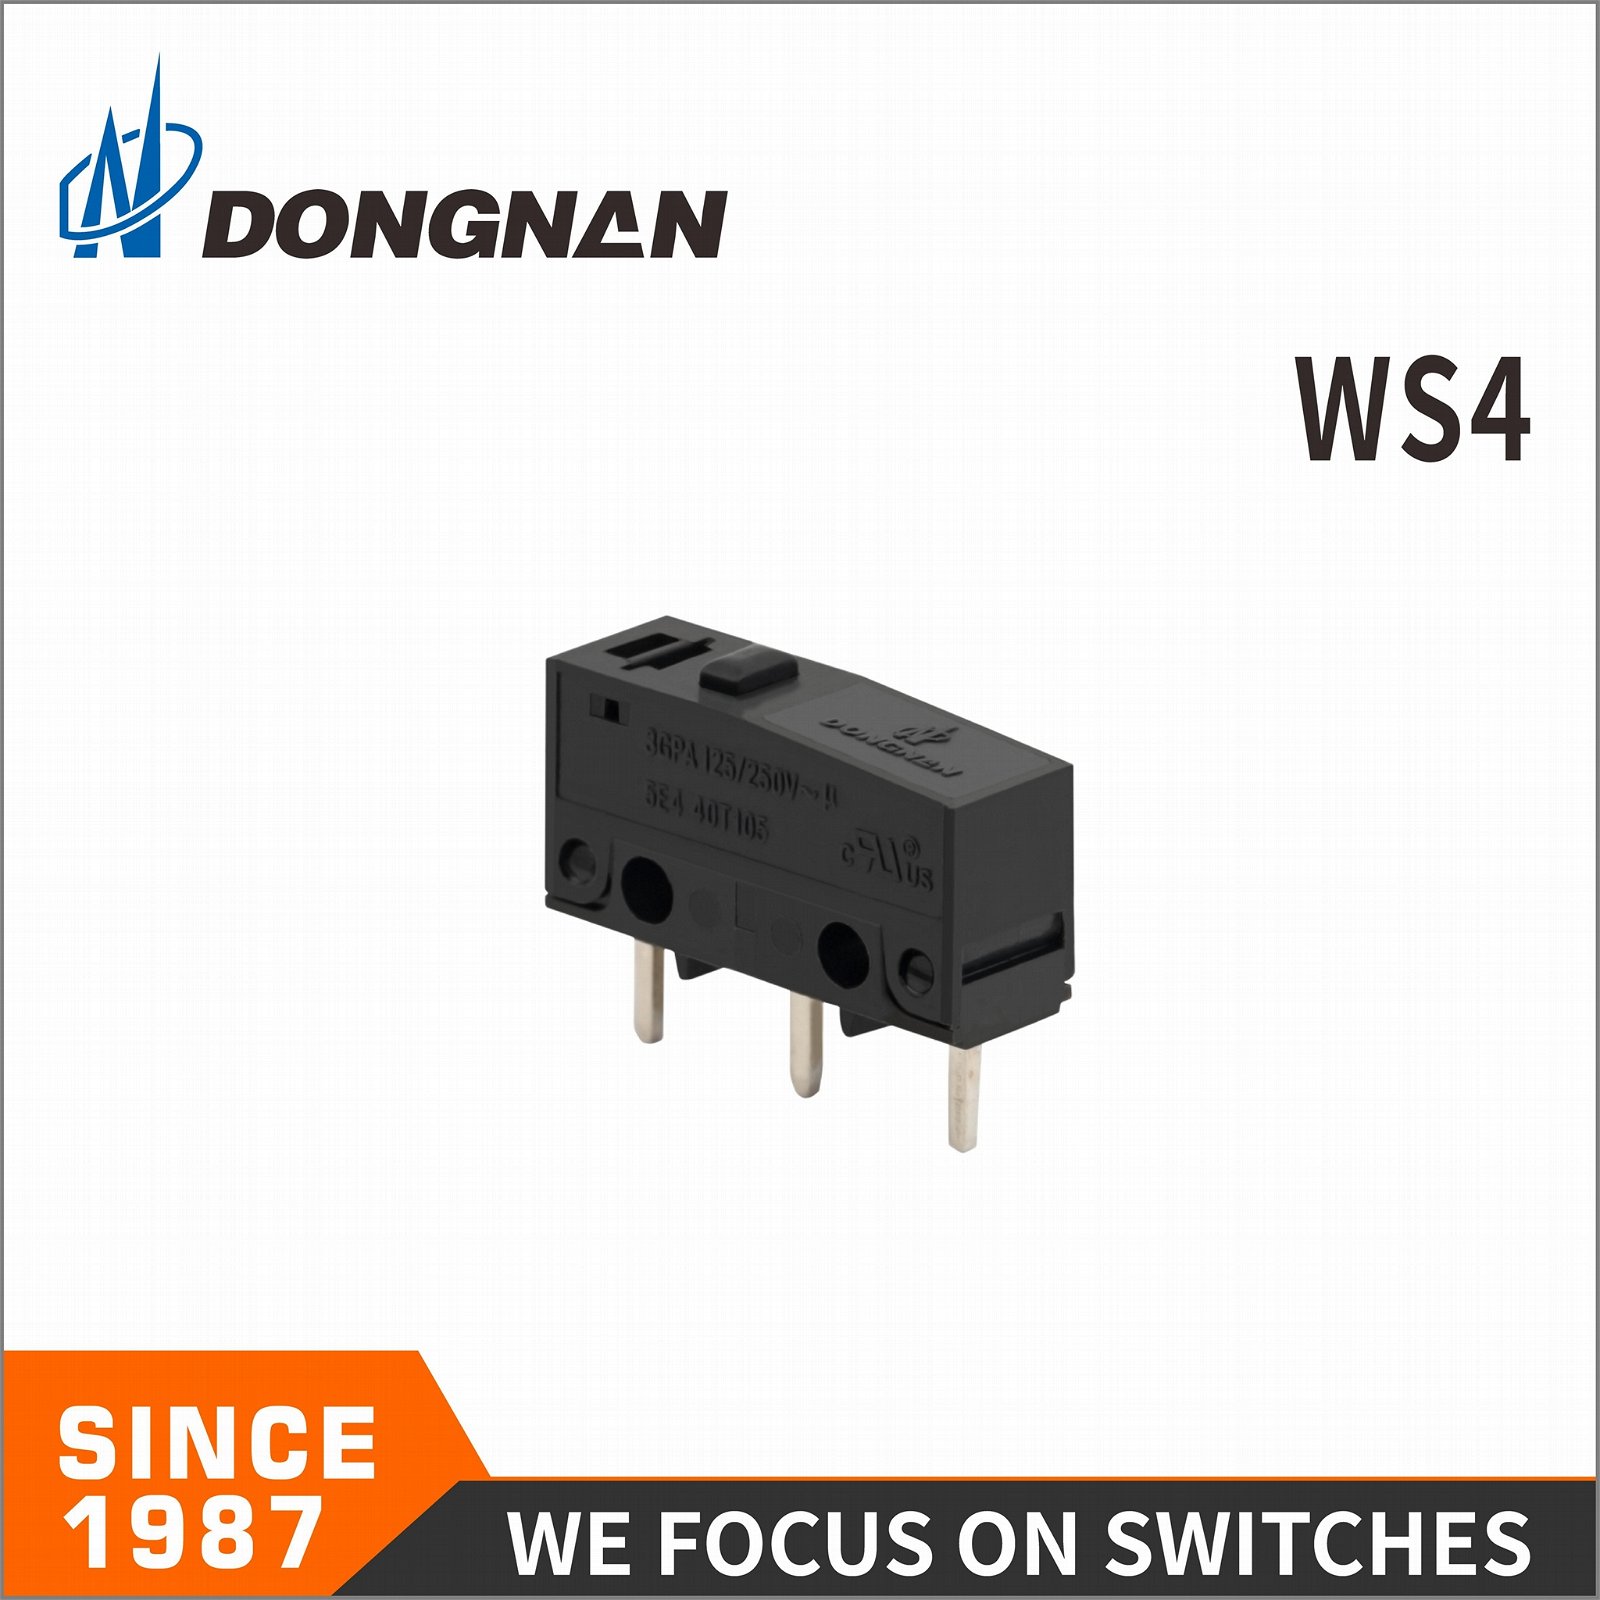 Dongnna WS4 Subminiature Size Waterproof Switch for Car and Home Appliances 3